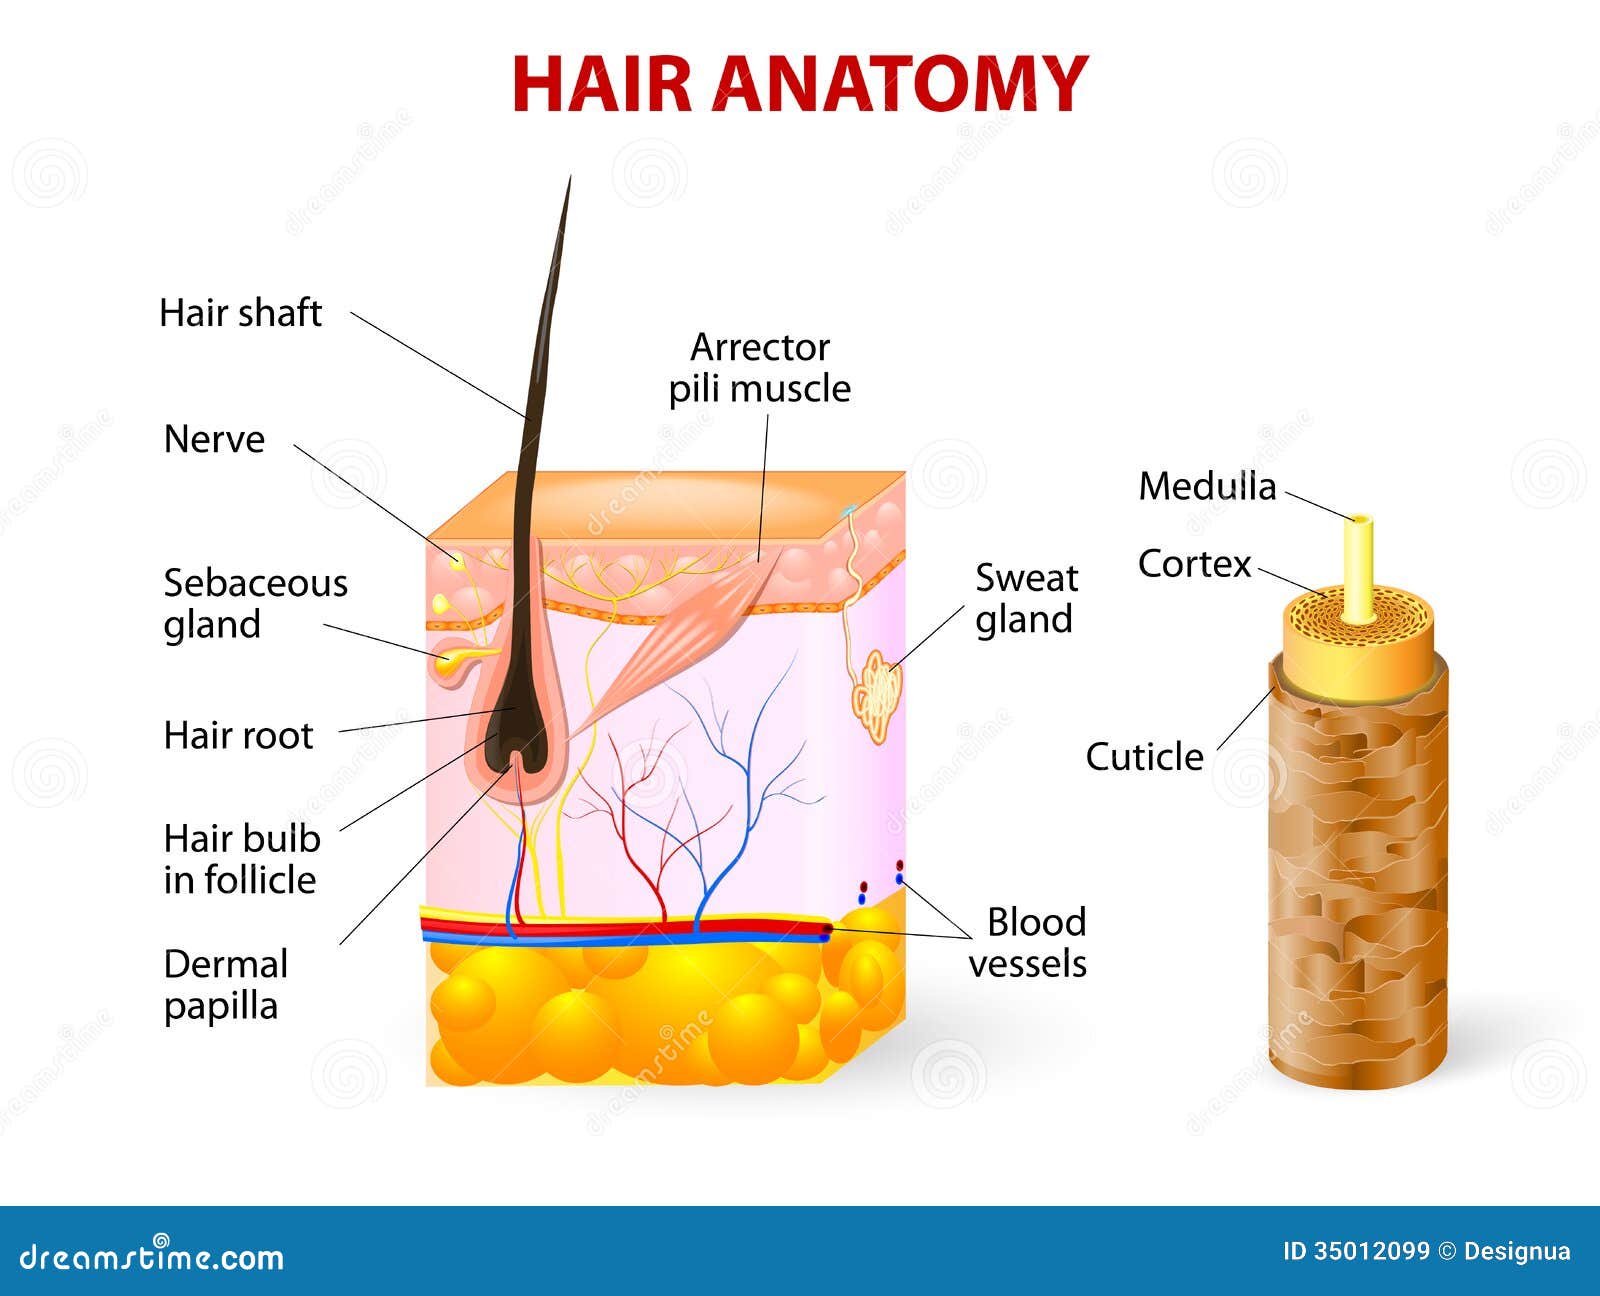 Anatomy and Physiology of Hair  IntechOpen